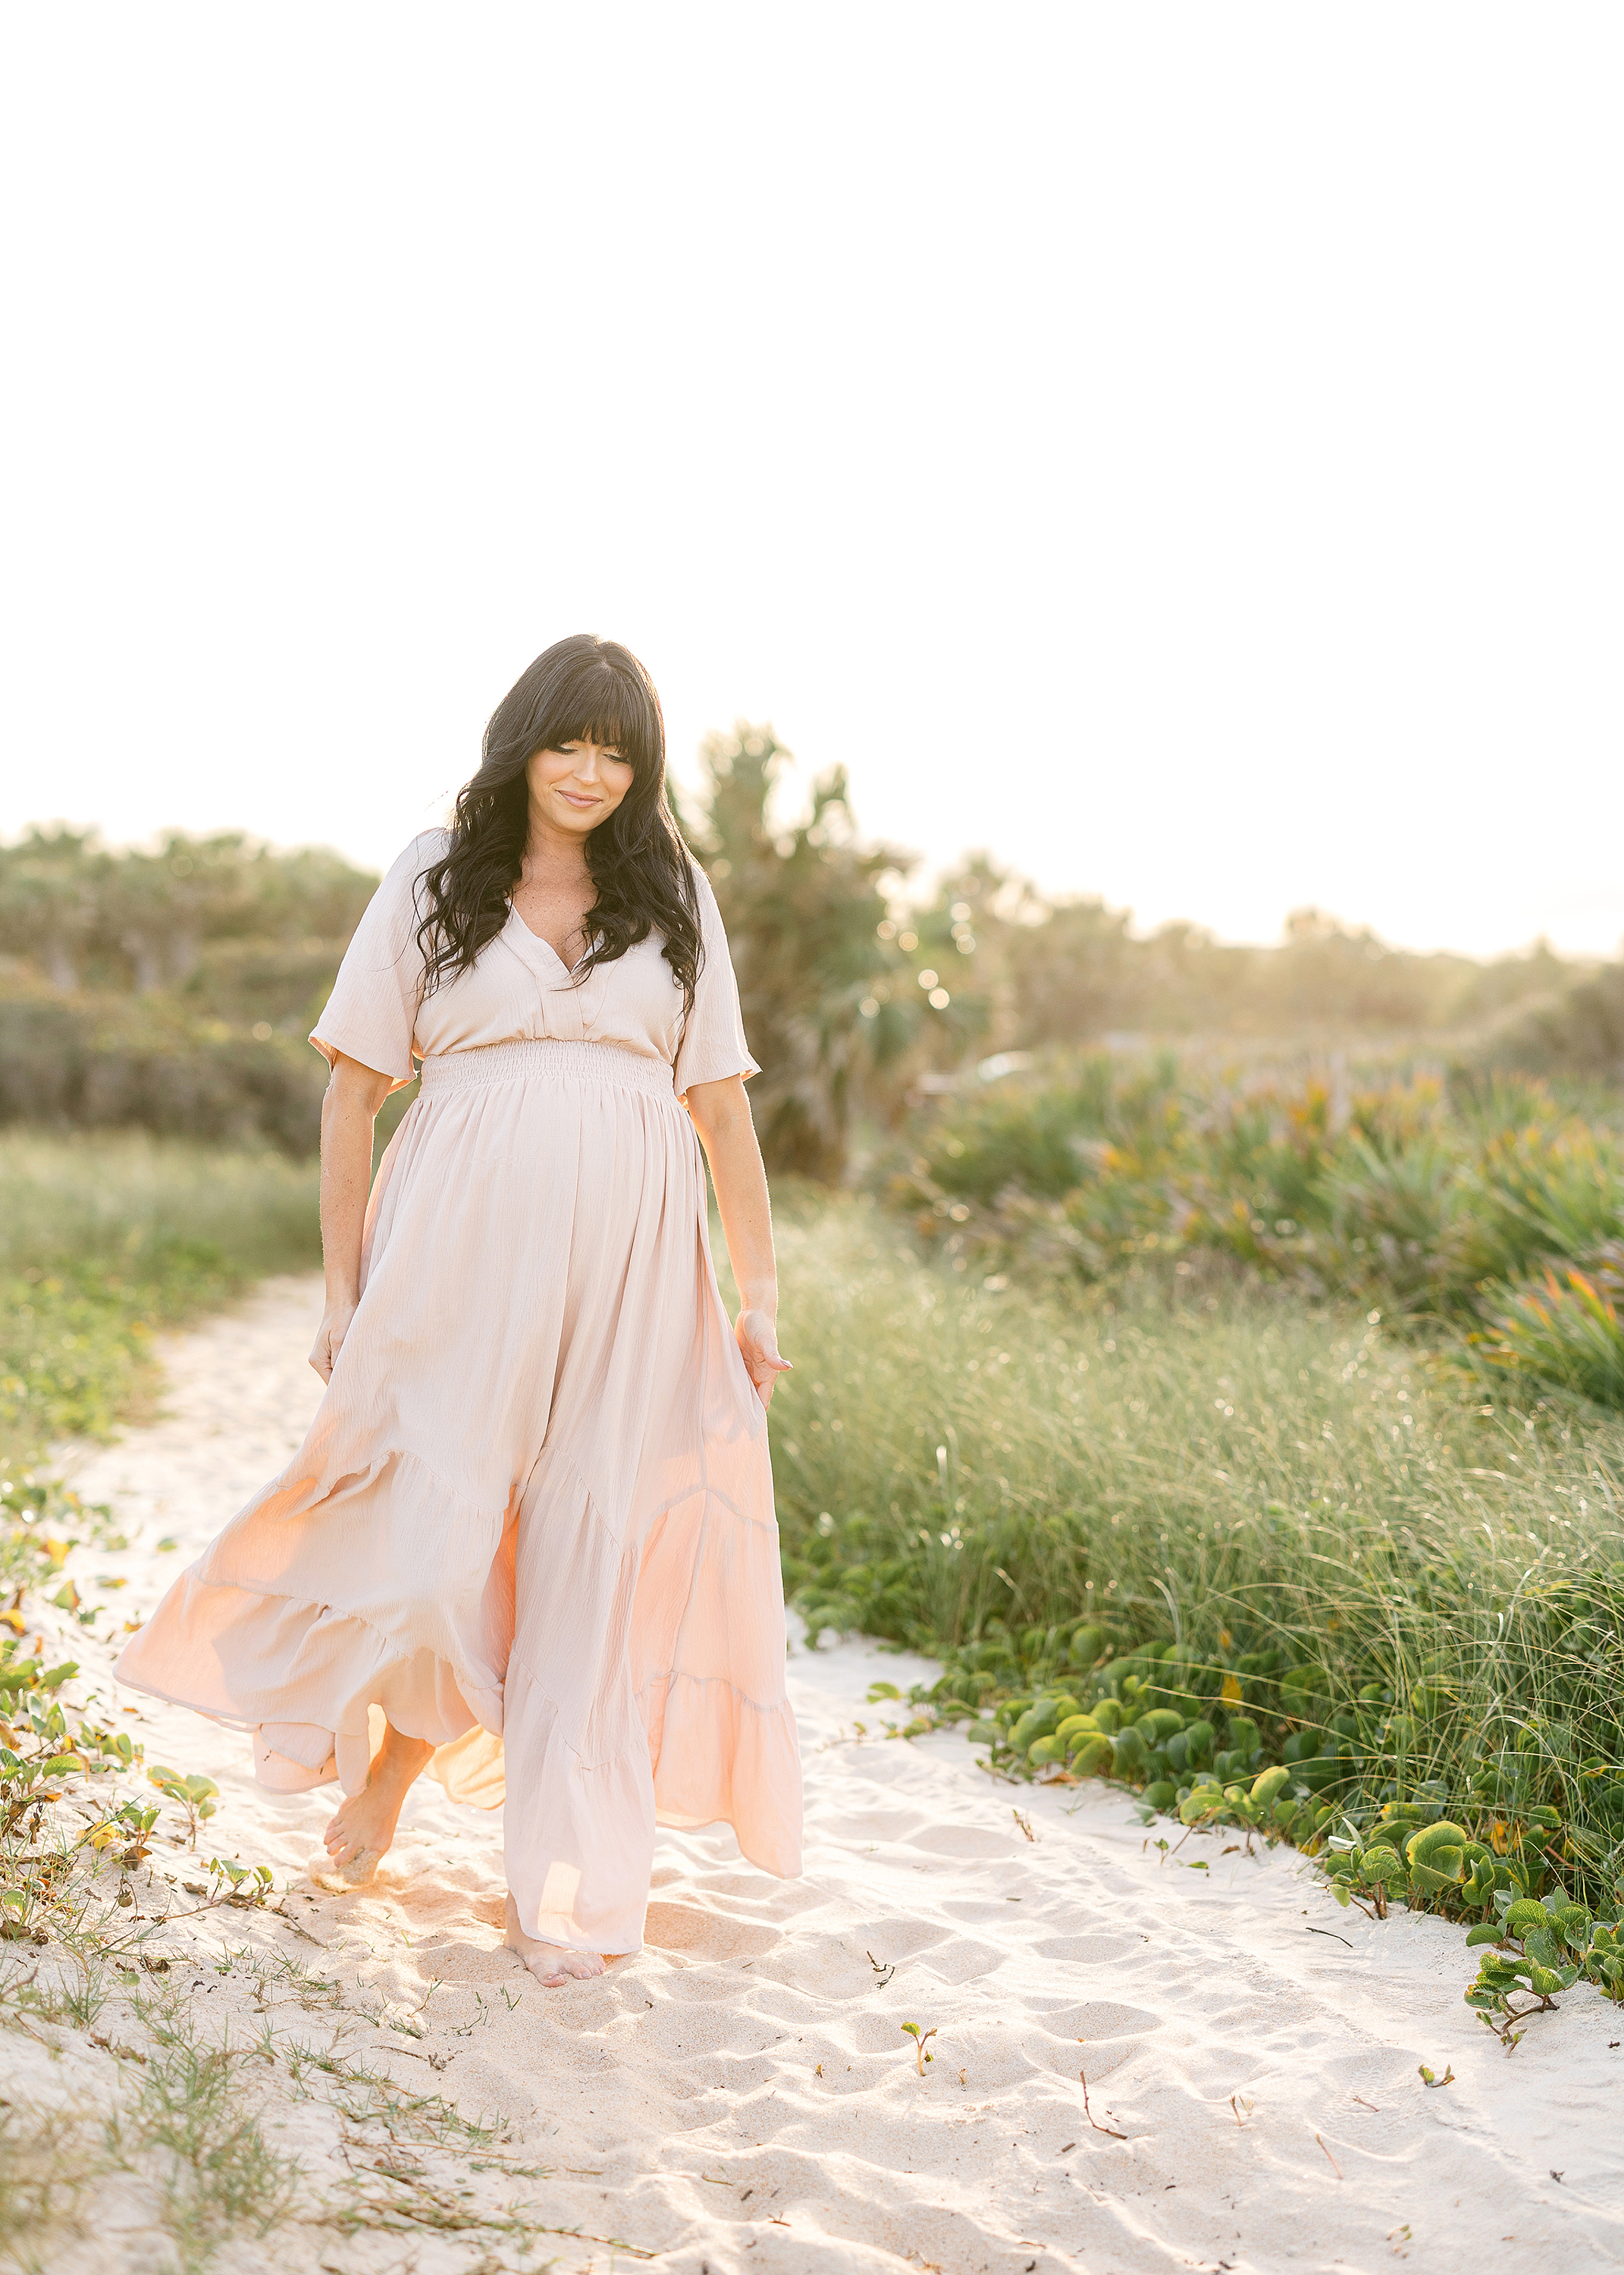 Sun-filled maternity portrait of a woman walking on the beach at sunset.